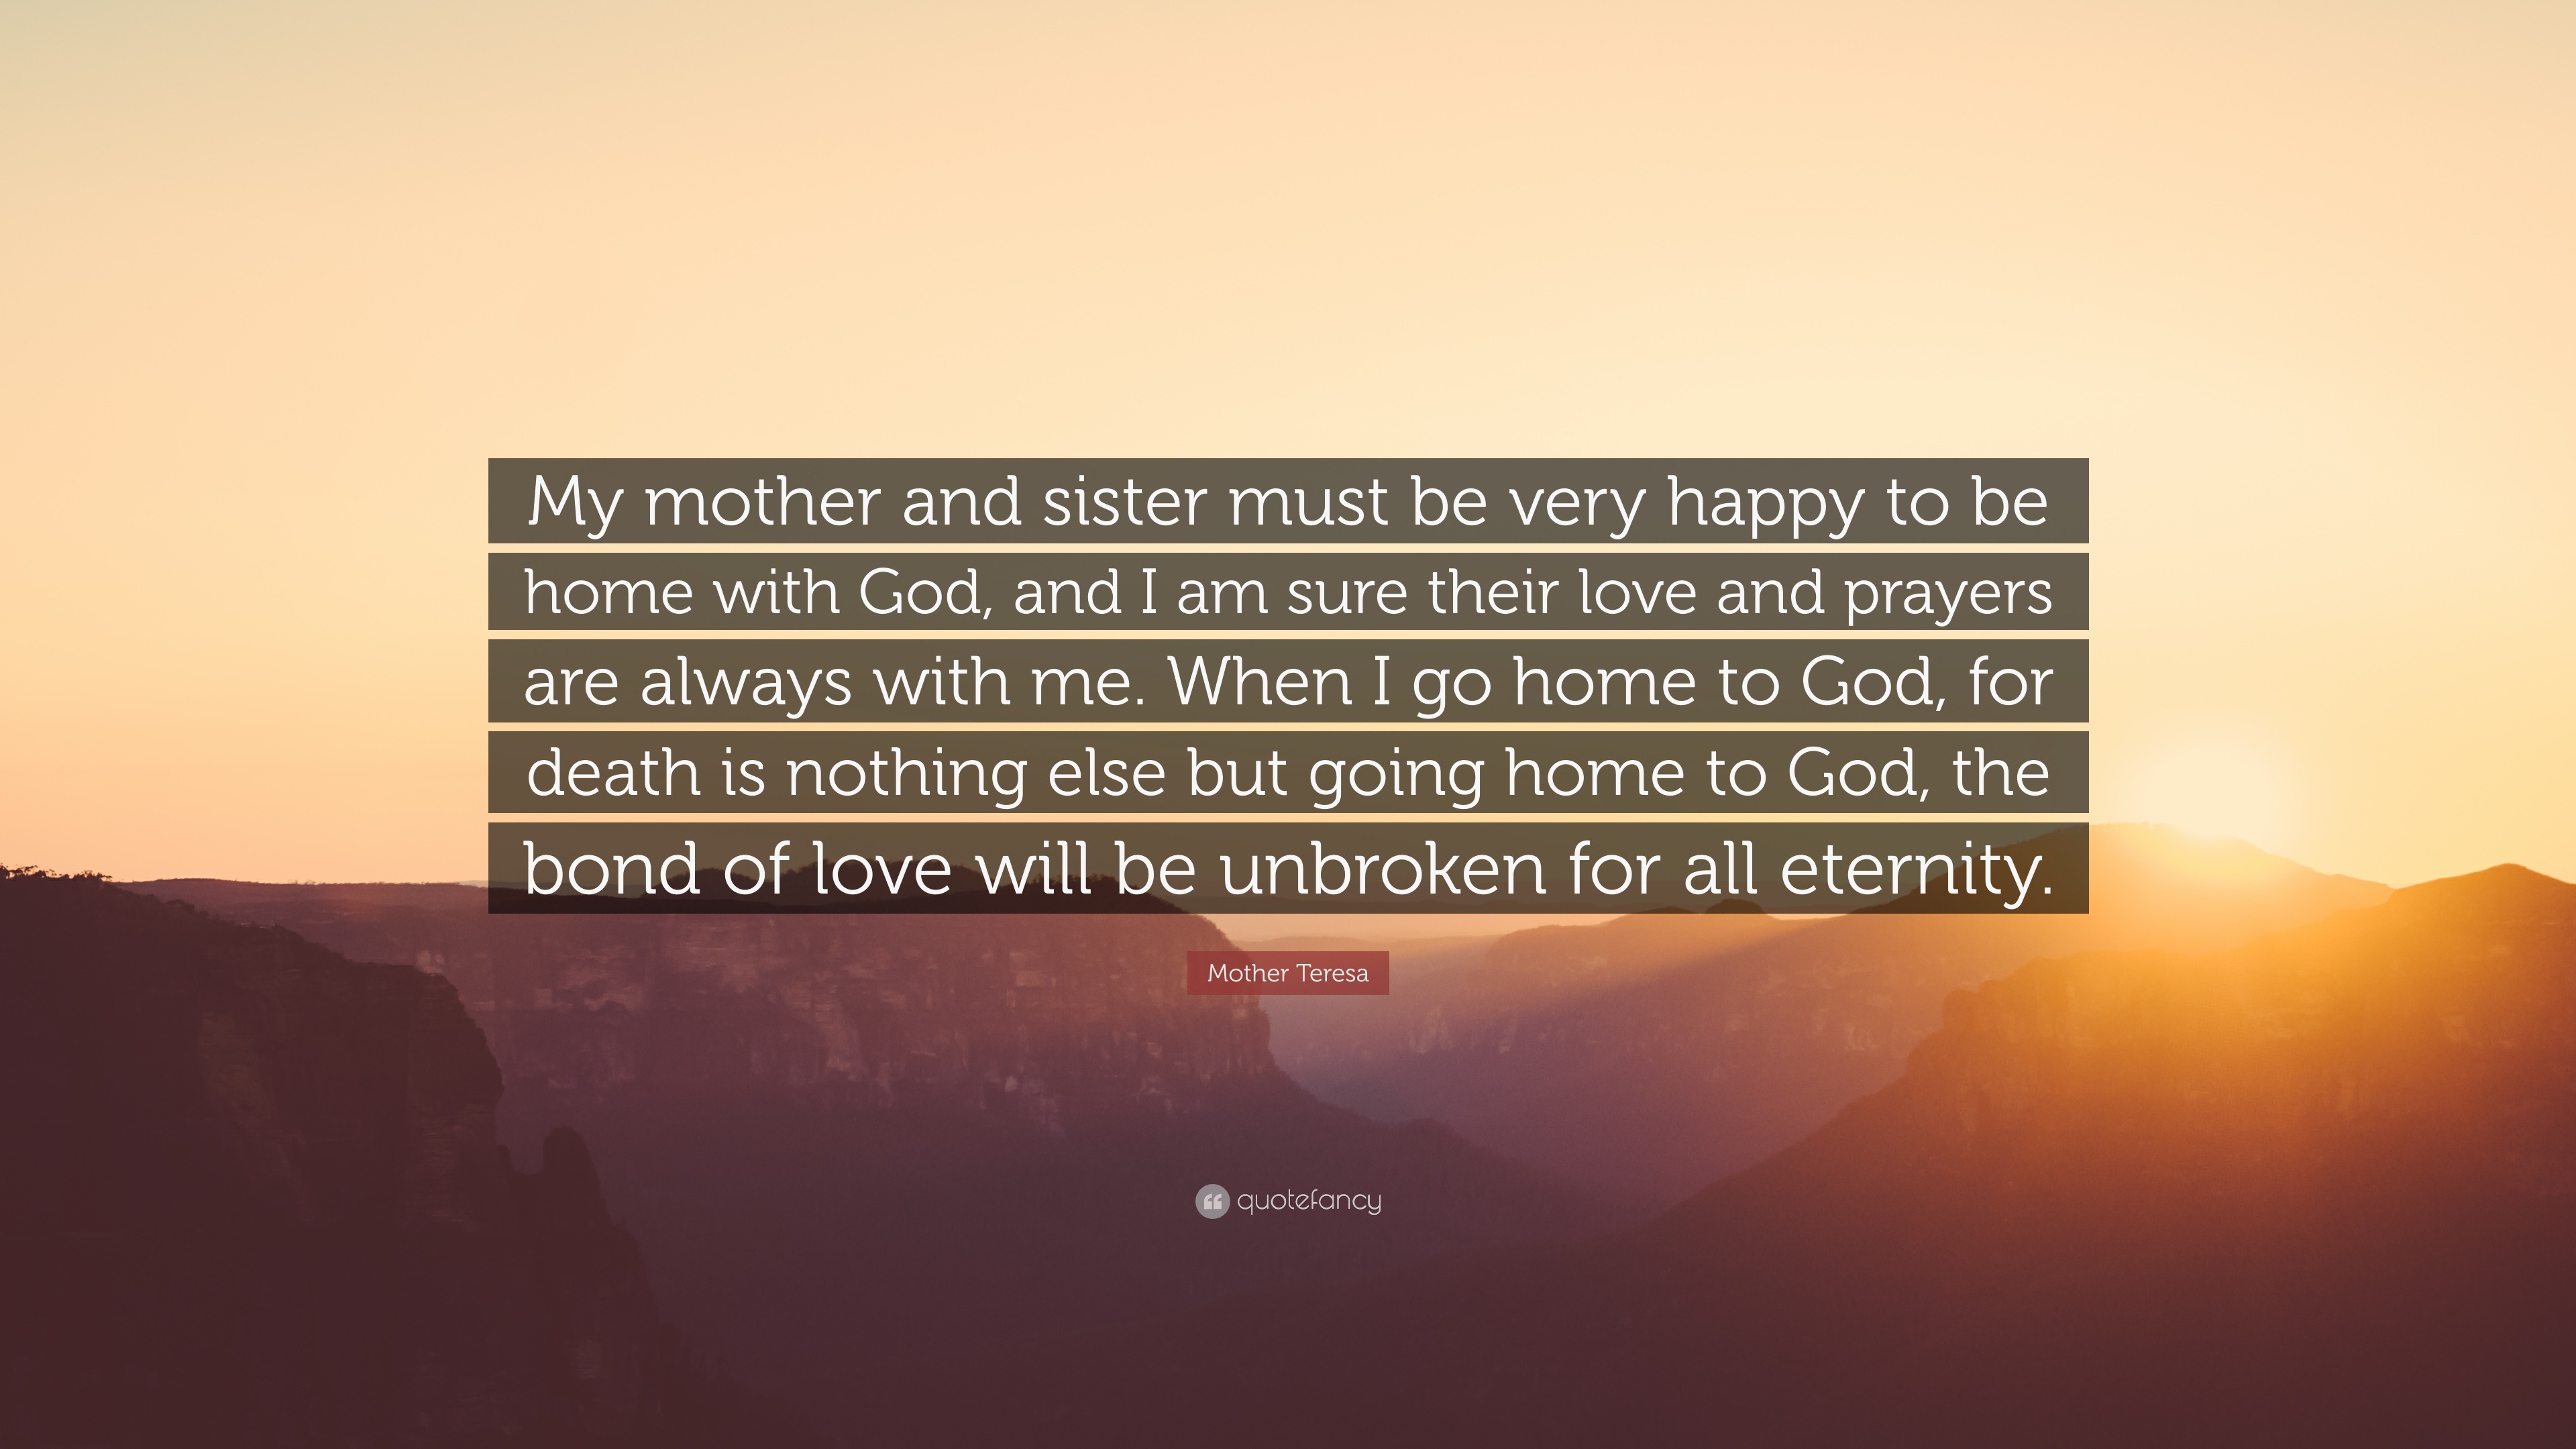 Mother Teresa Quote My Mother And Sister Must Be Very Happy To Be Home With God And I Am Sure Their Love And Prayers Are Always With Me Wh